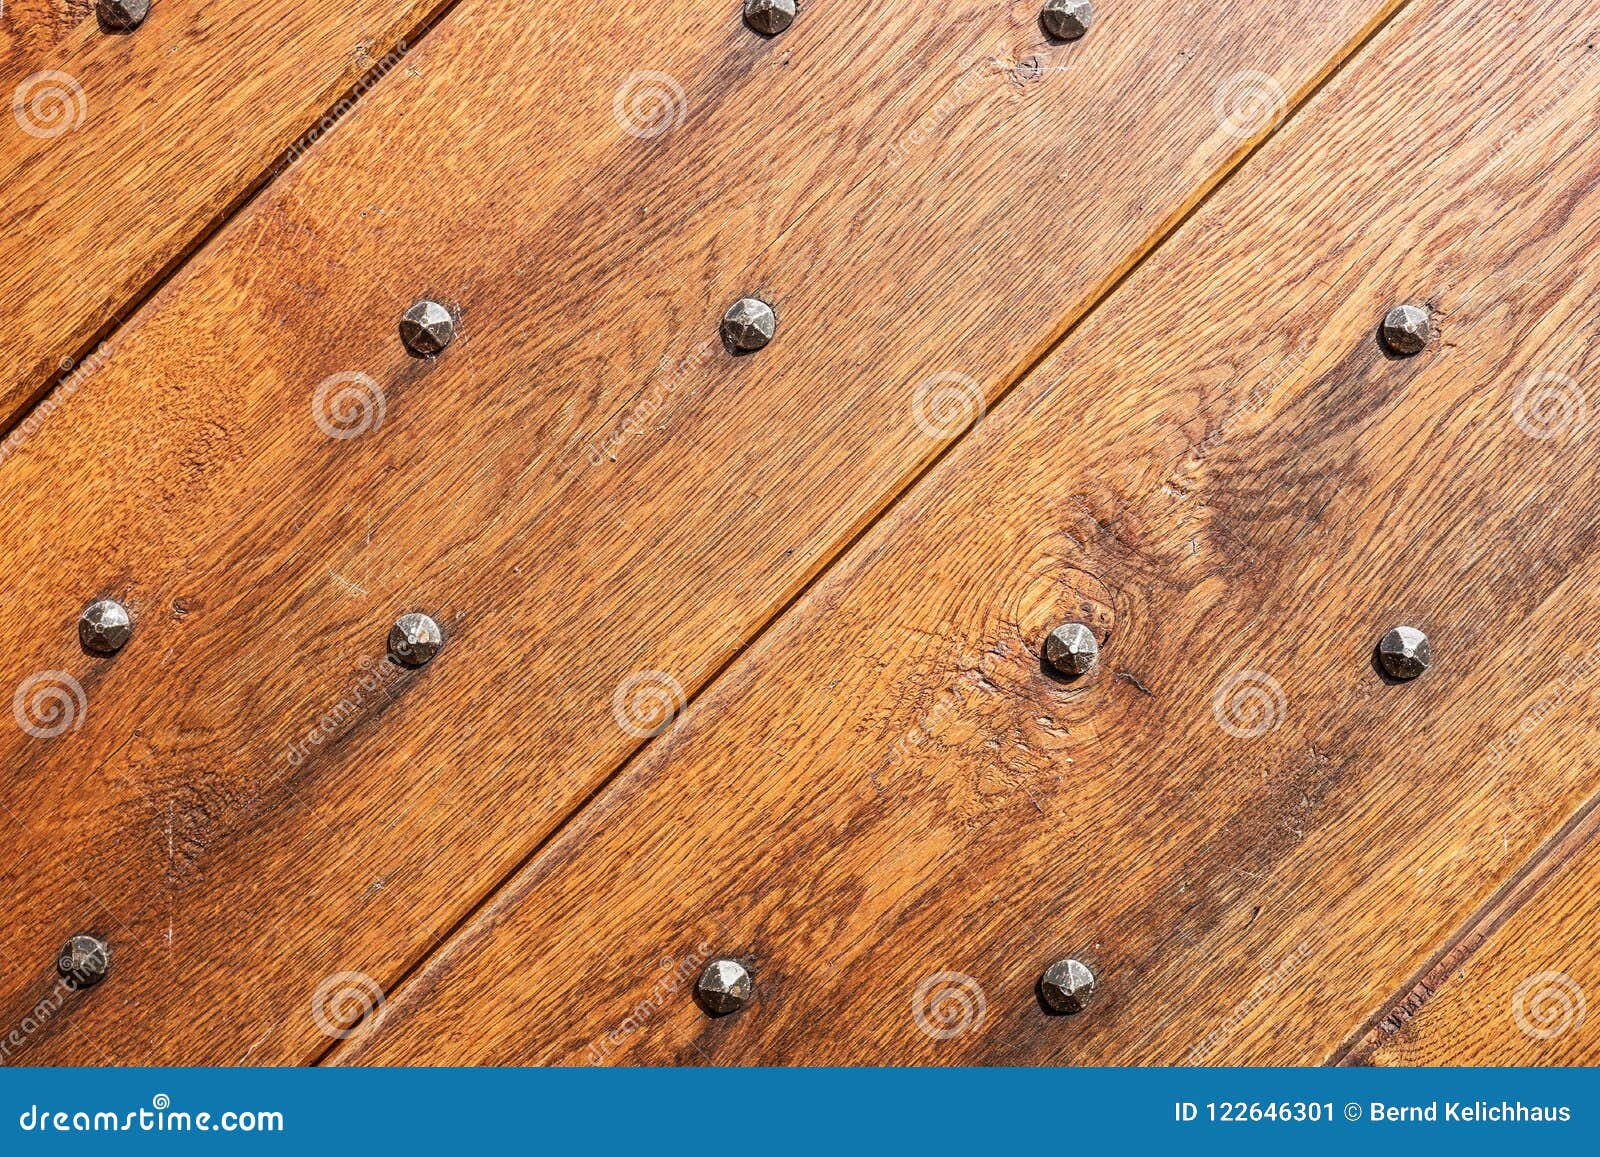 Vintage Brown Wooden Background with Metal Rivets Stock Image - Image ...